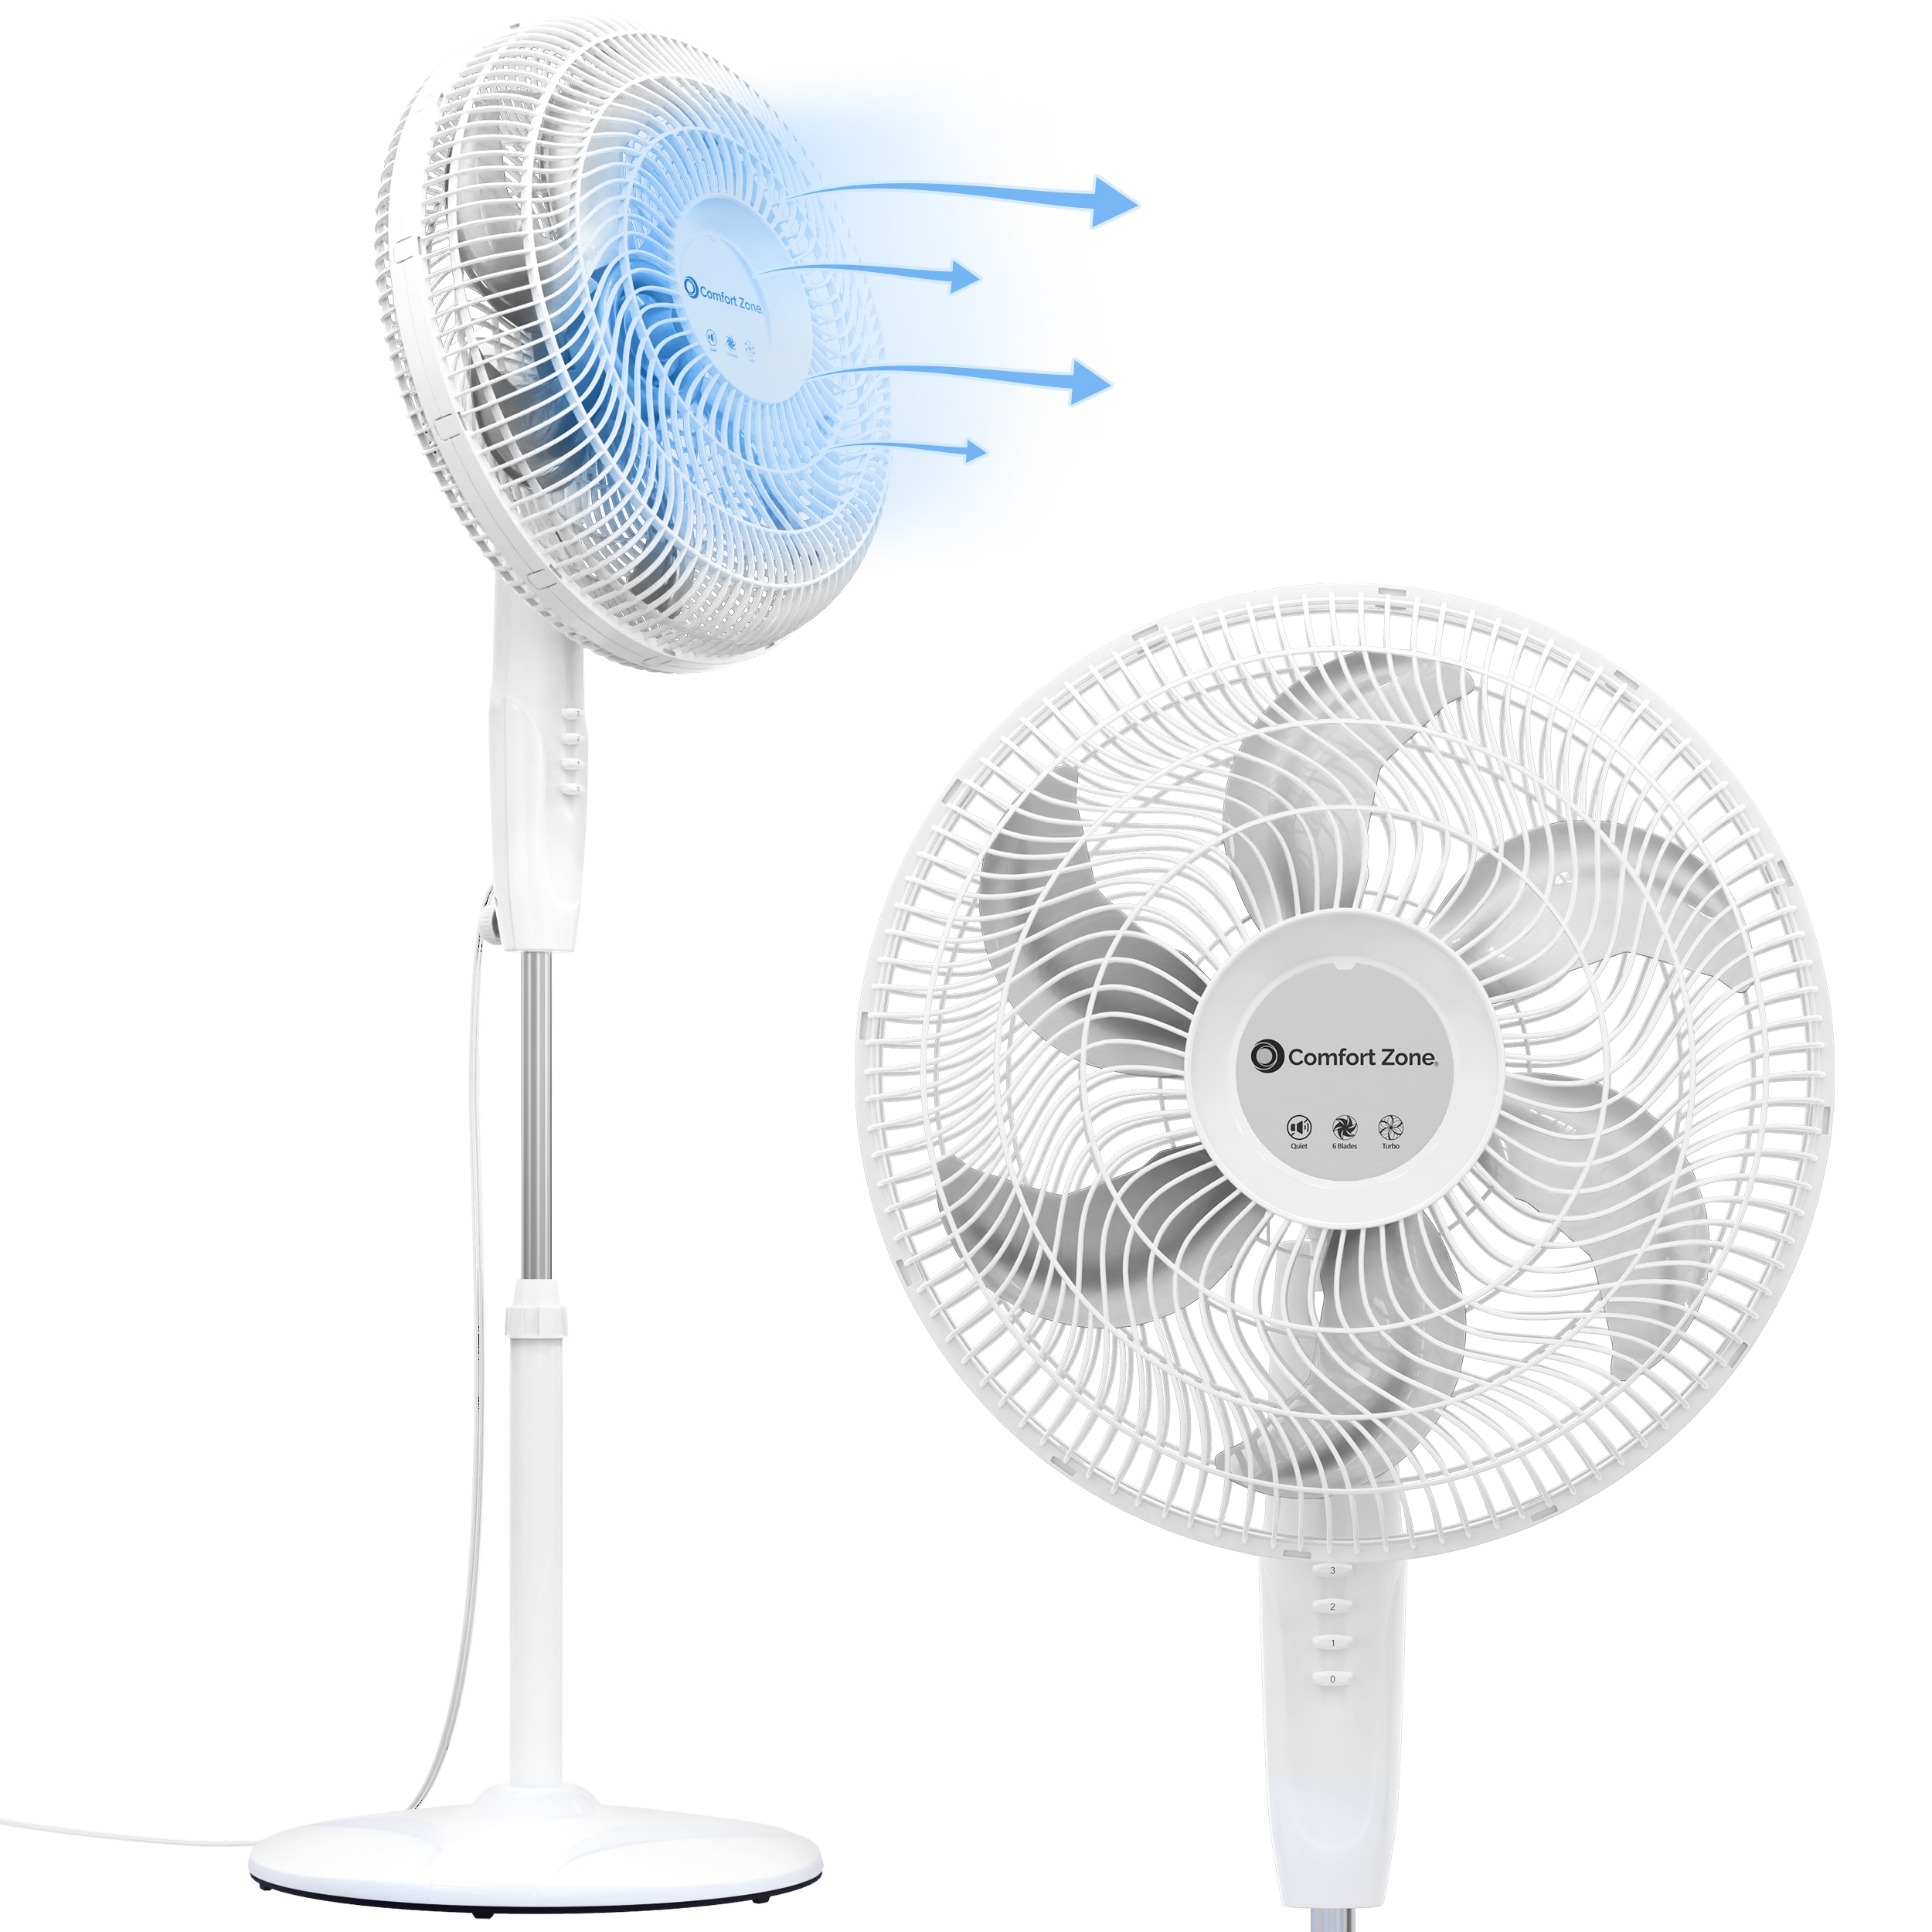 Best Crompton fans: Stay cool and comfortable with our top 7